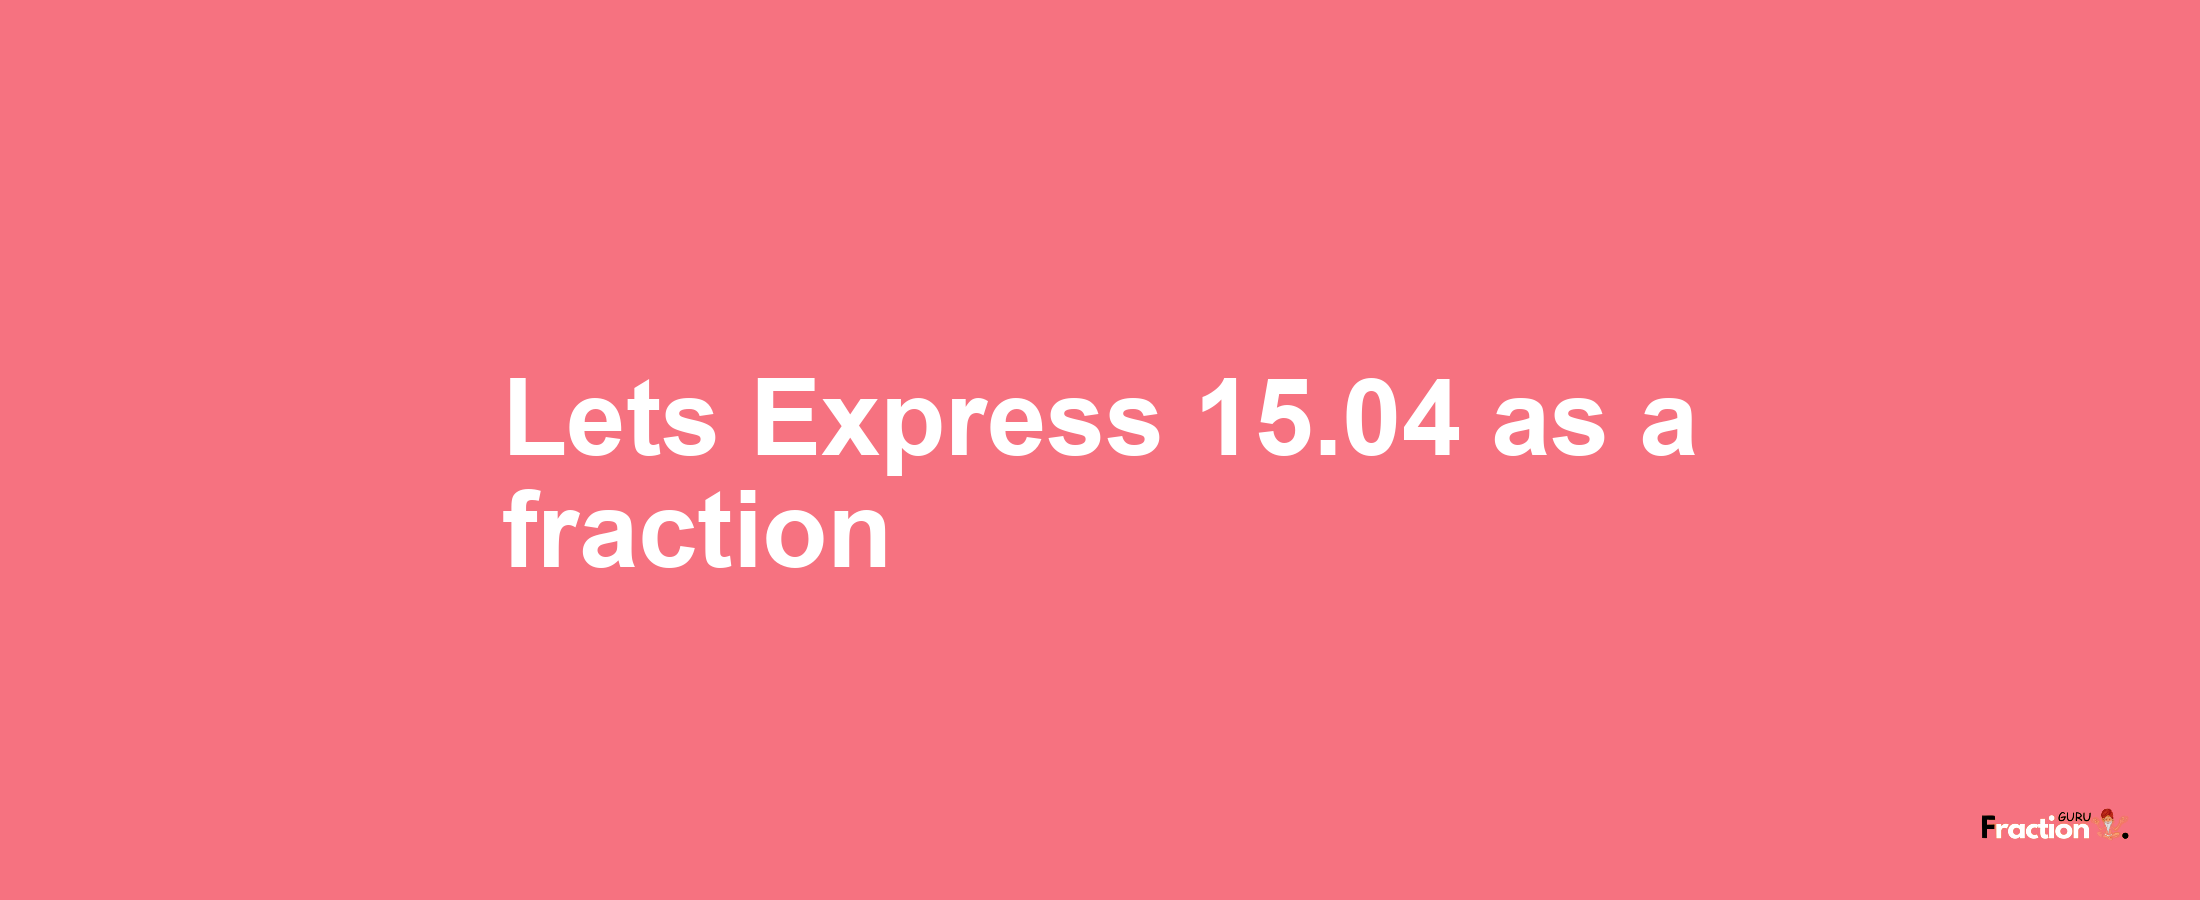 Lets Express 15.04 as afraction